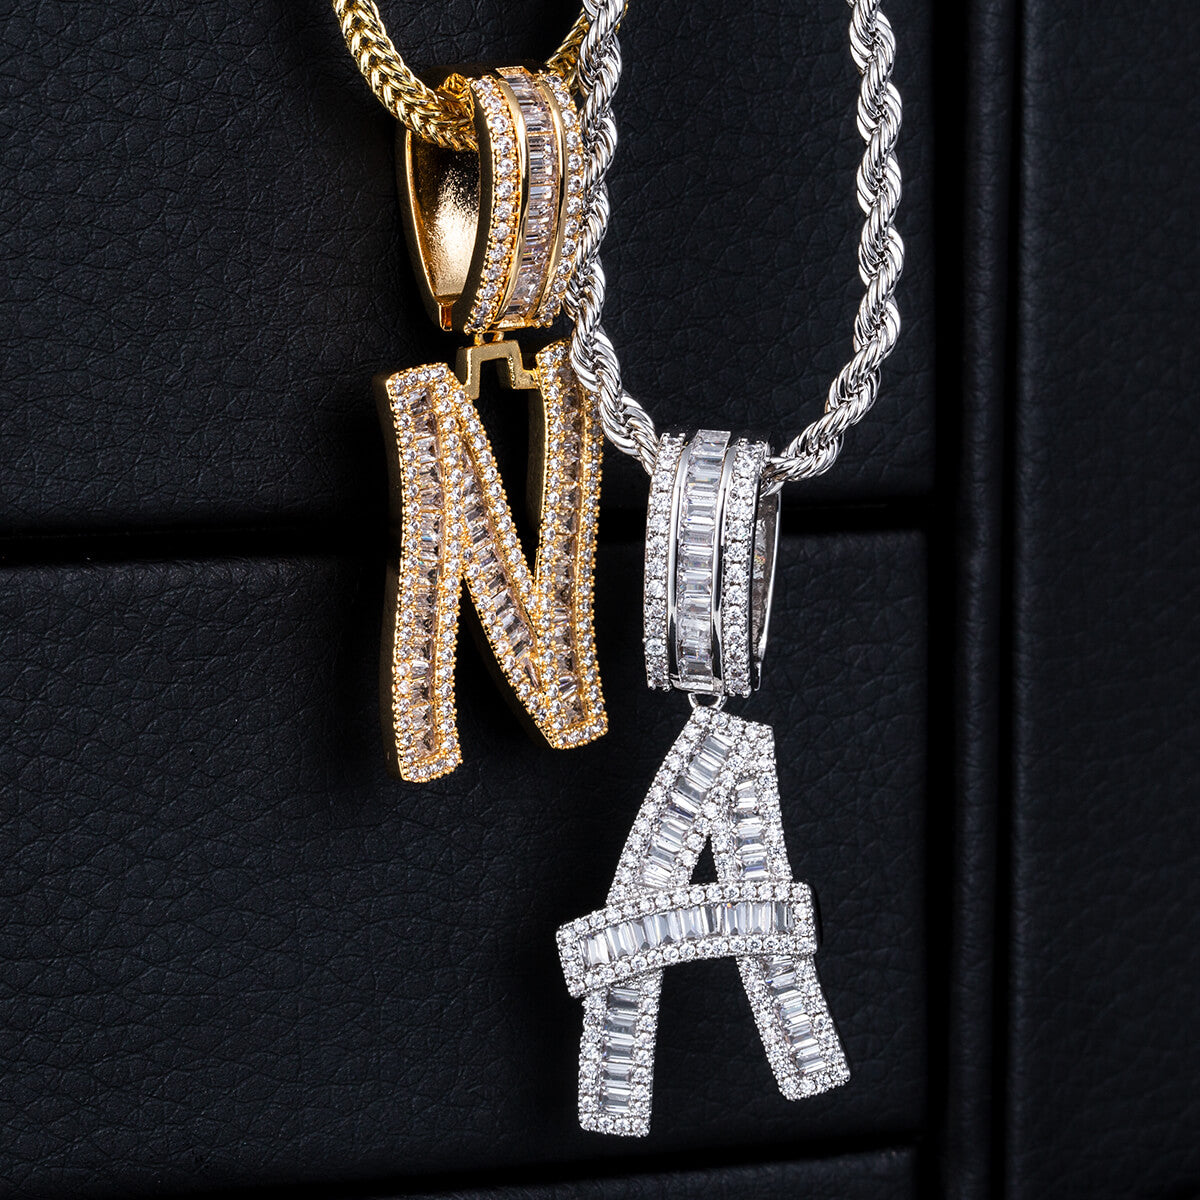 https://www.krkcom.com/collections/hot-sellers/products/gold-iced-baguette-letters-pendant